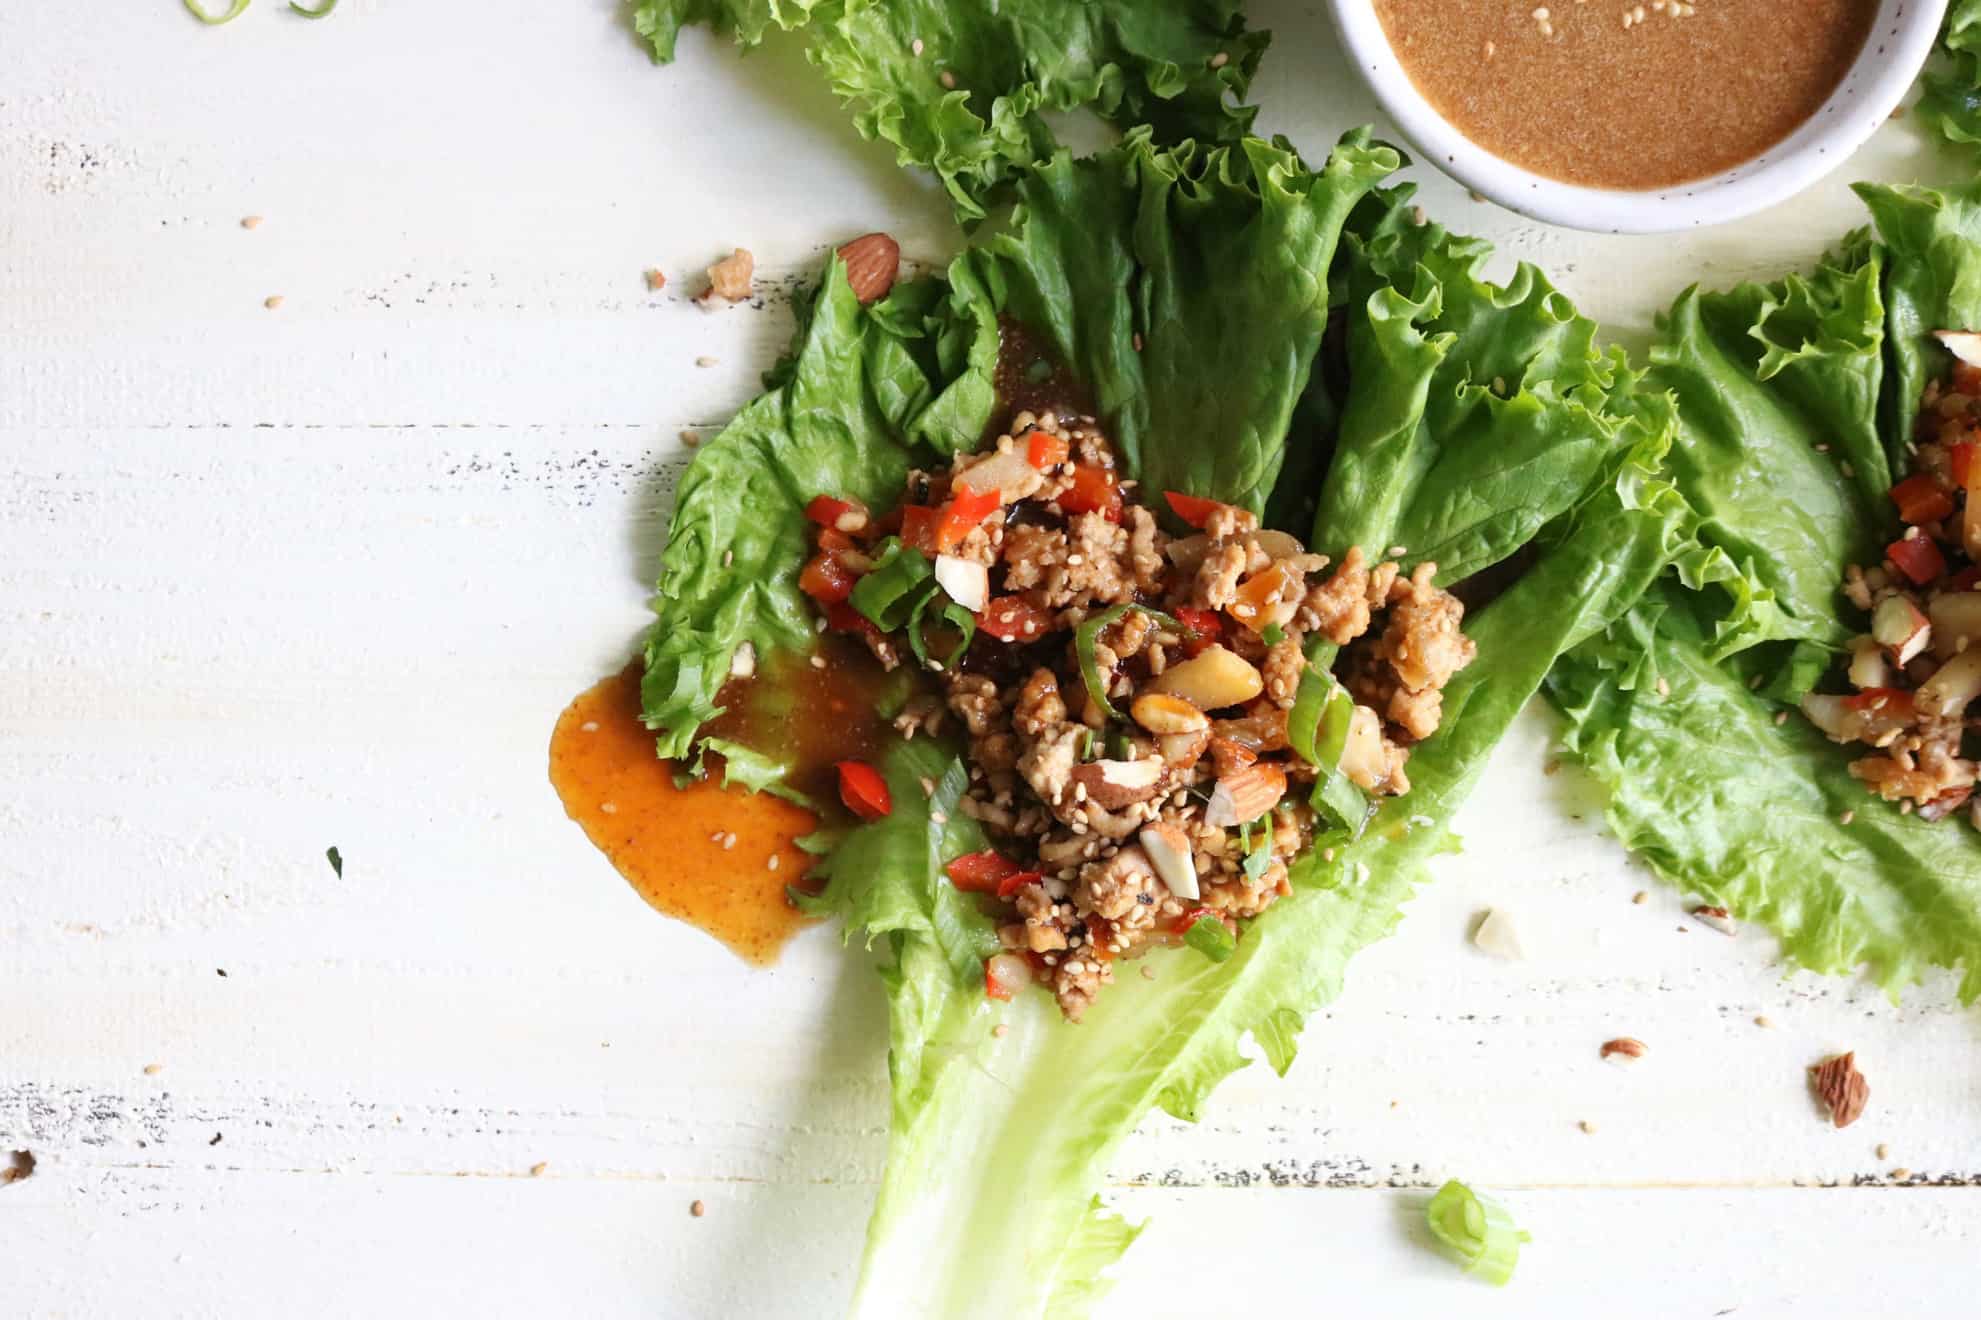 This is an overhead image of a chicken lettuce wrap with sauce dripping out the side. The lettuce wrap is on a white surface with other lettuce wraps to the right side and upper part of the image. A small sauce bowl is in the top right of the image. 